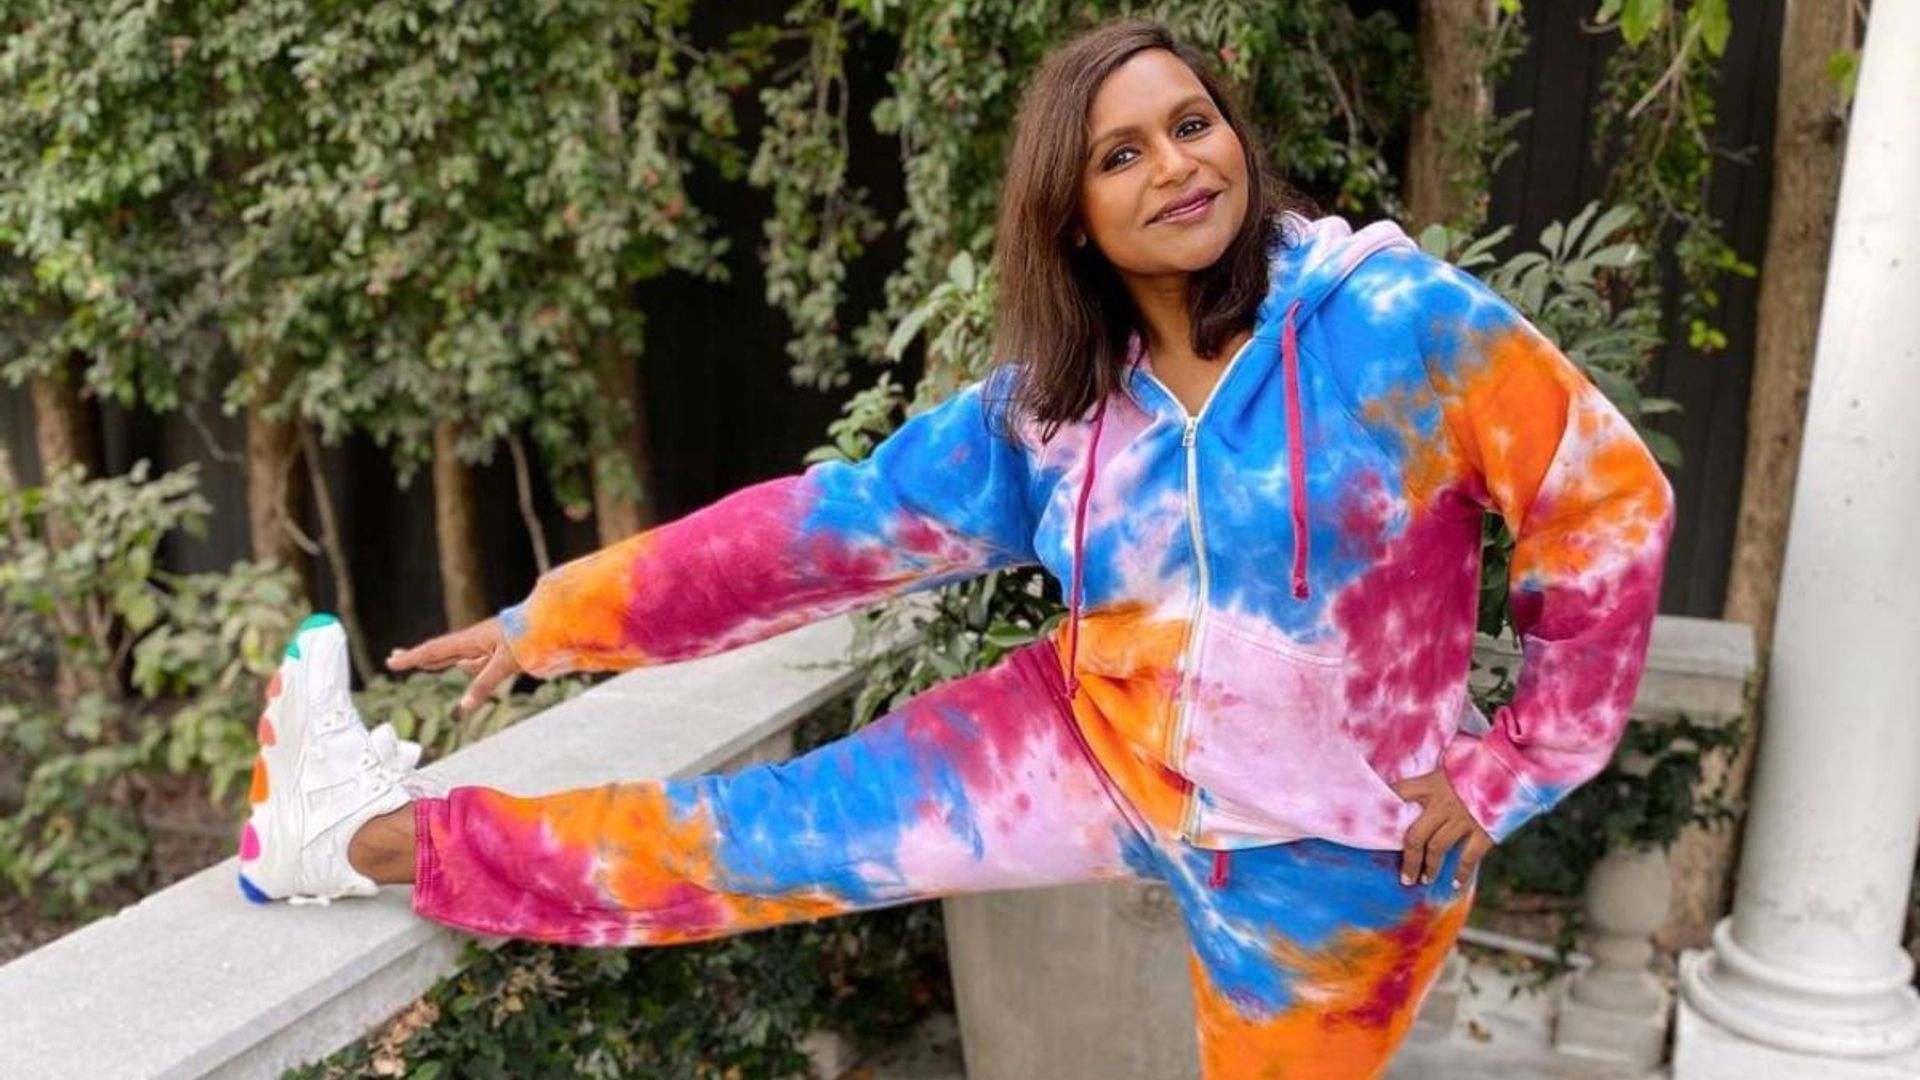 Mindy Kaling's tie-dye loungewear is what we all want to be wearing right now - and it's on sale